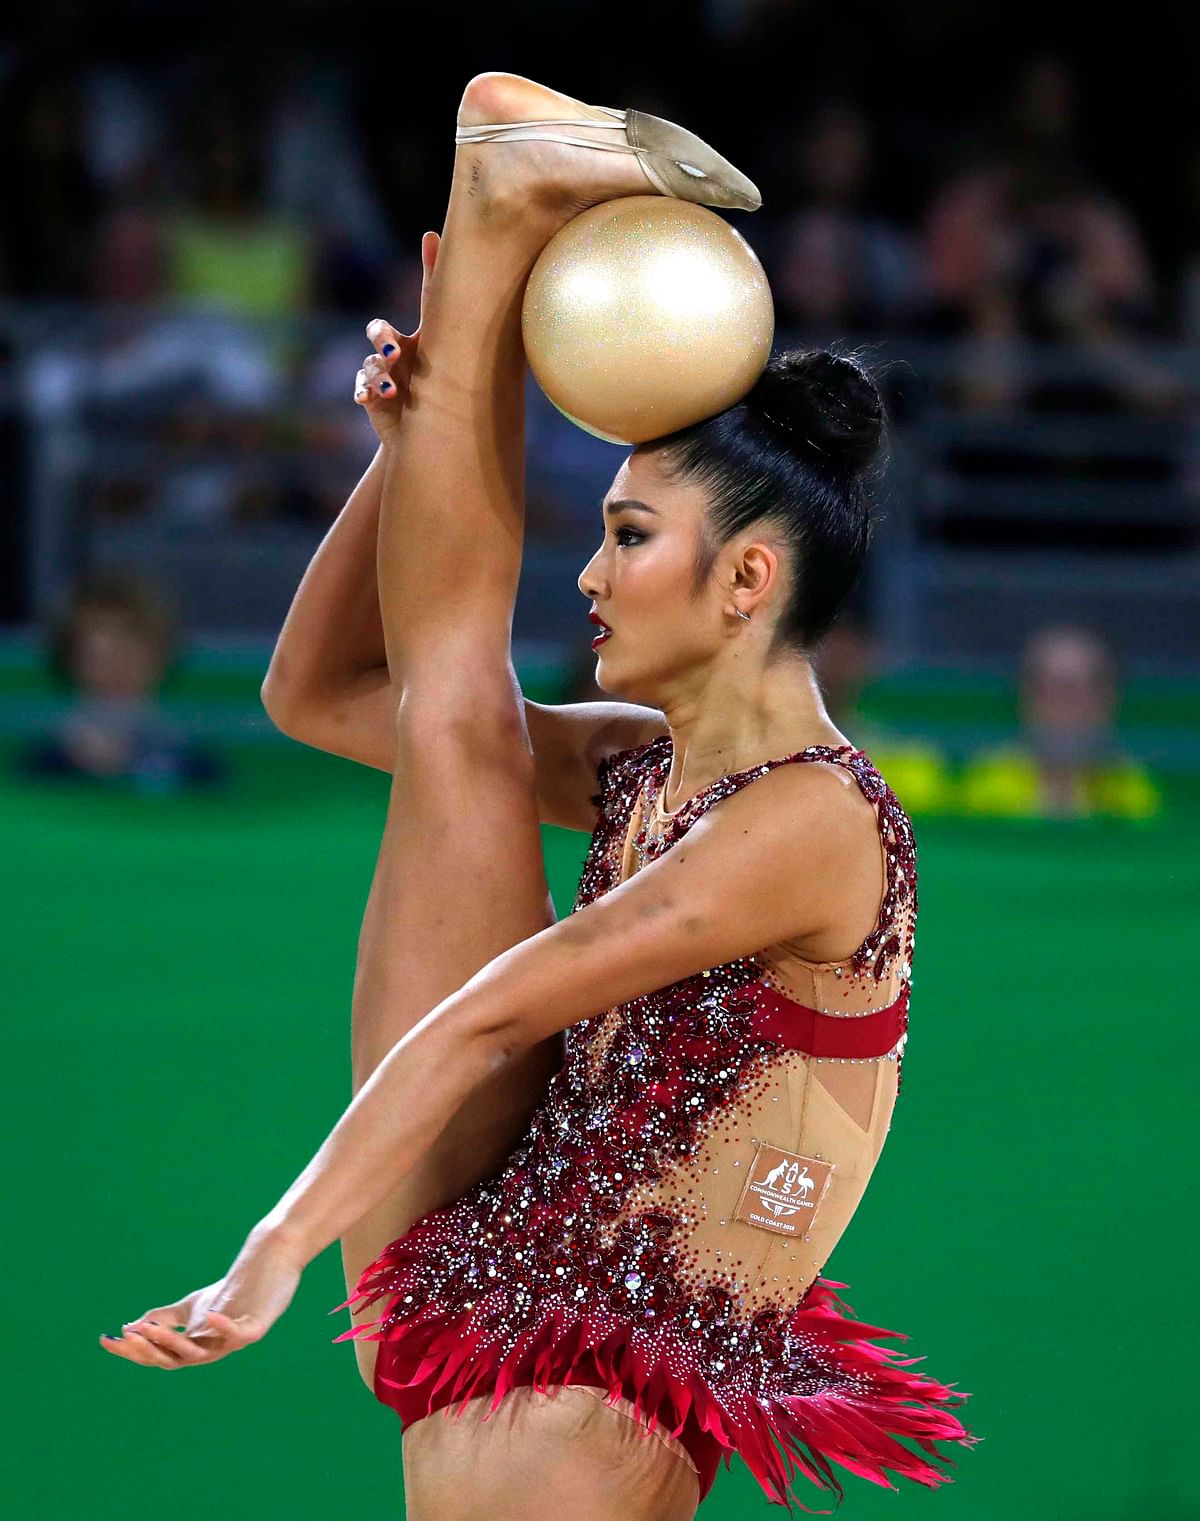 Enid Sung of Australia competes in Rhythmic Gymnastics of Gold Coast 2018 Commonwealth Games on 11 April. Photo: Reuters